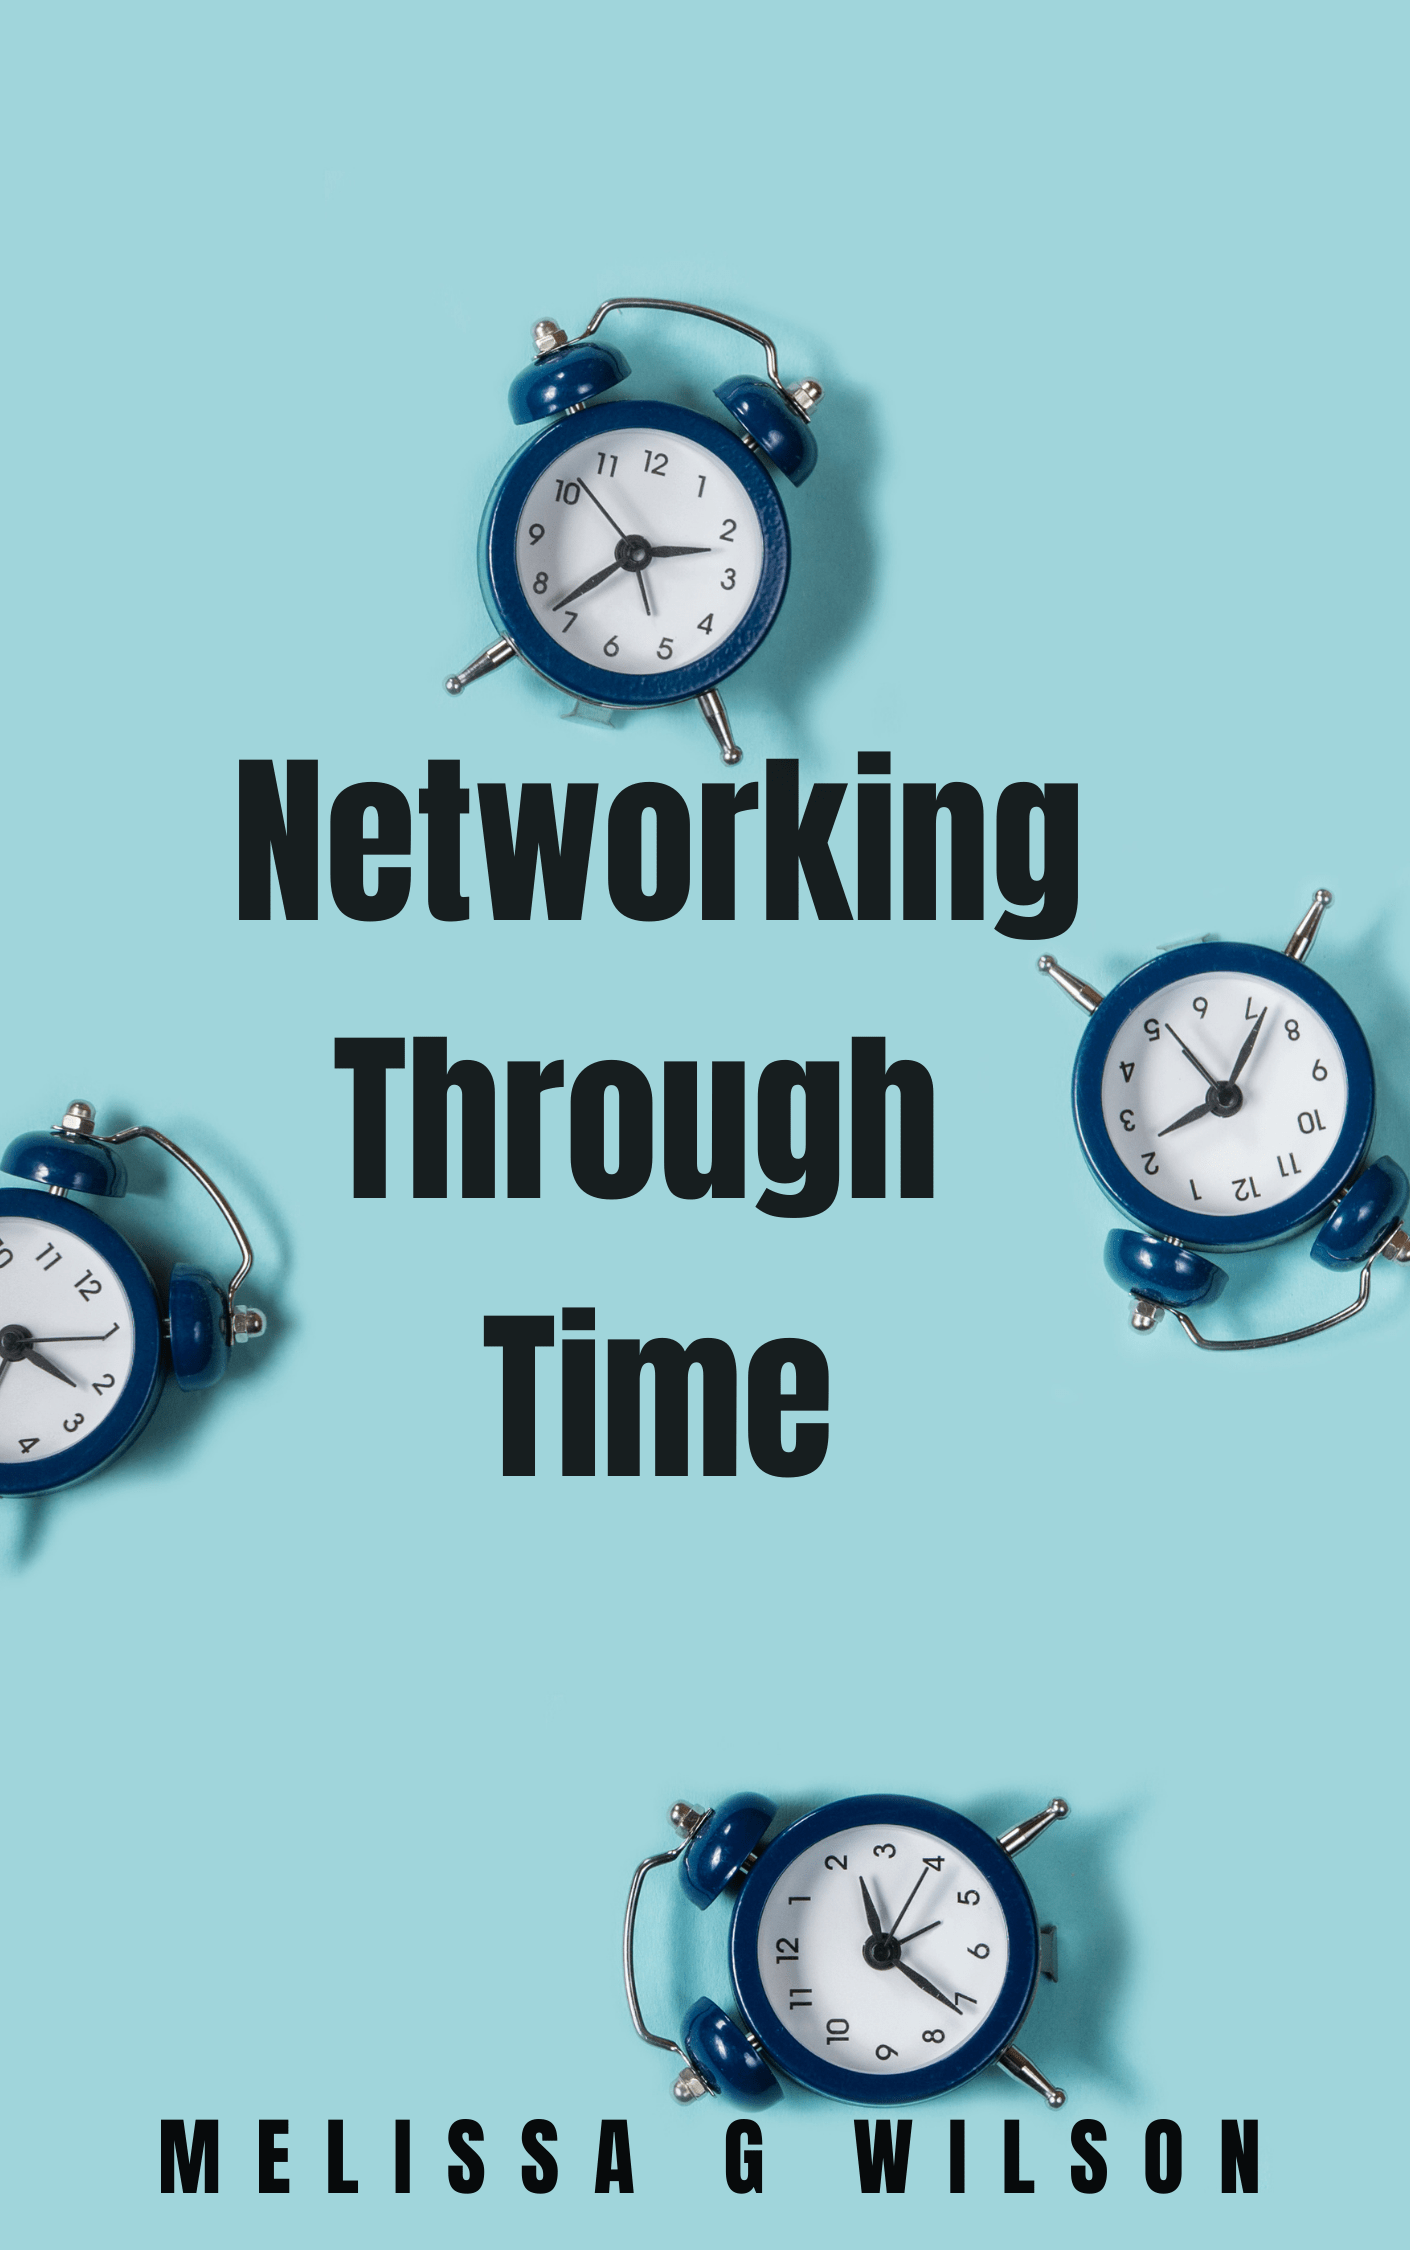 Networking Through Time Book Excerpt: Part 1